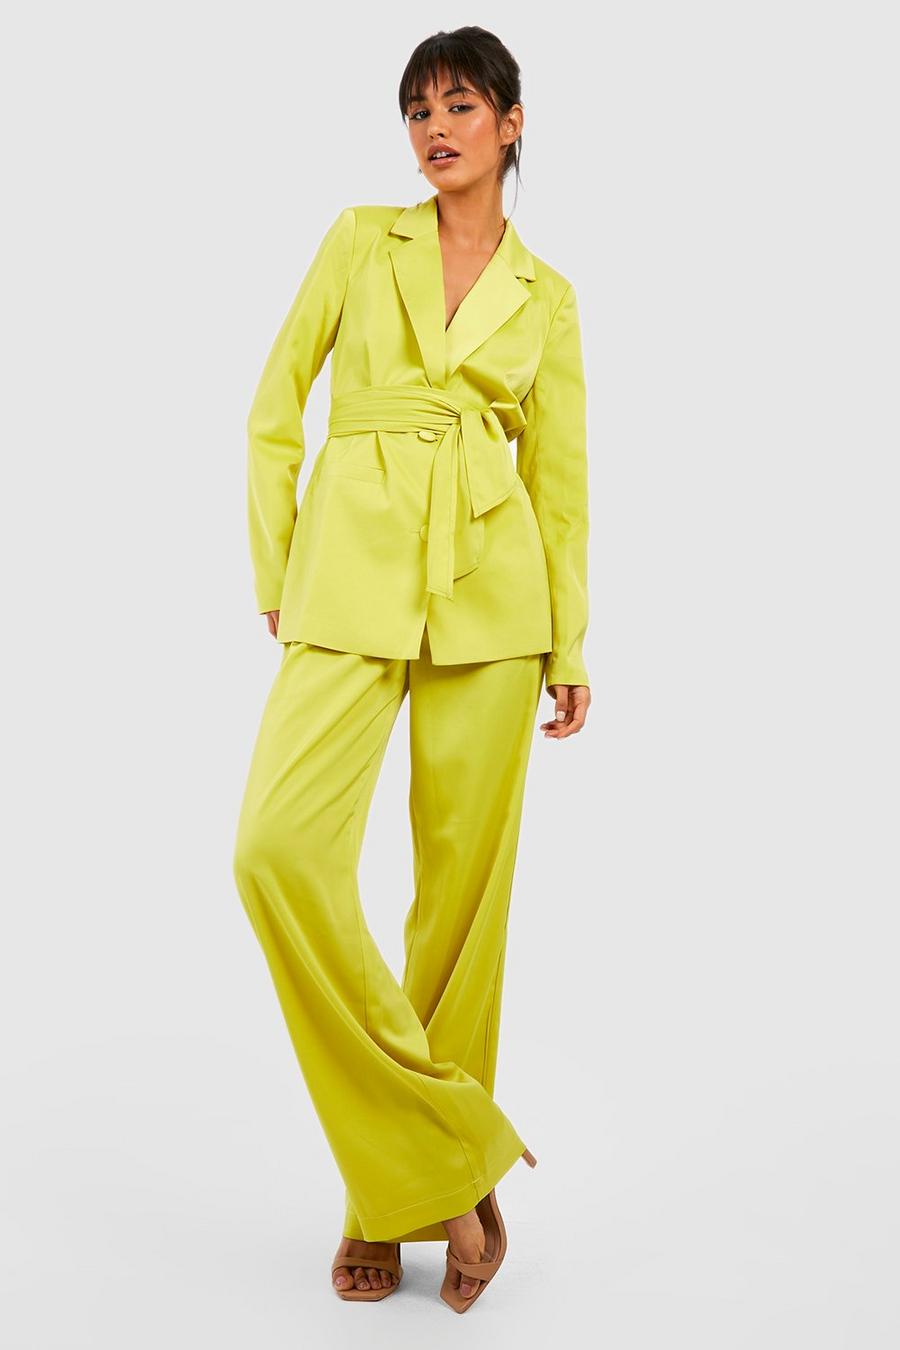 Chartreuse yellow Satin Pleat Front Straight Leg Trousers